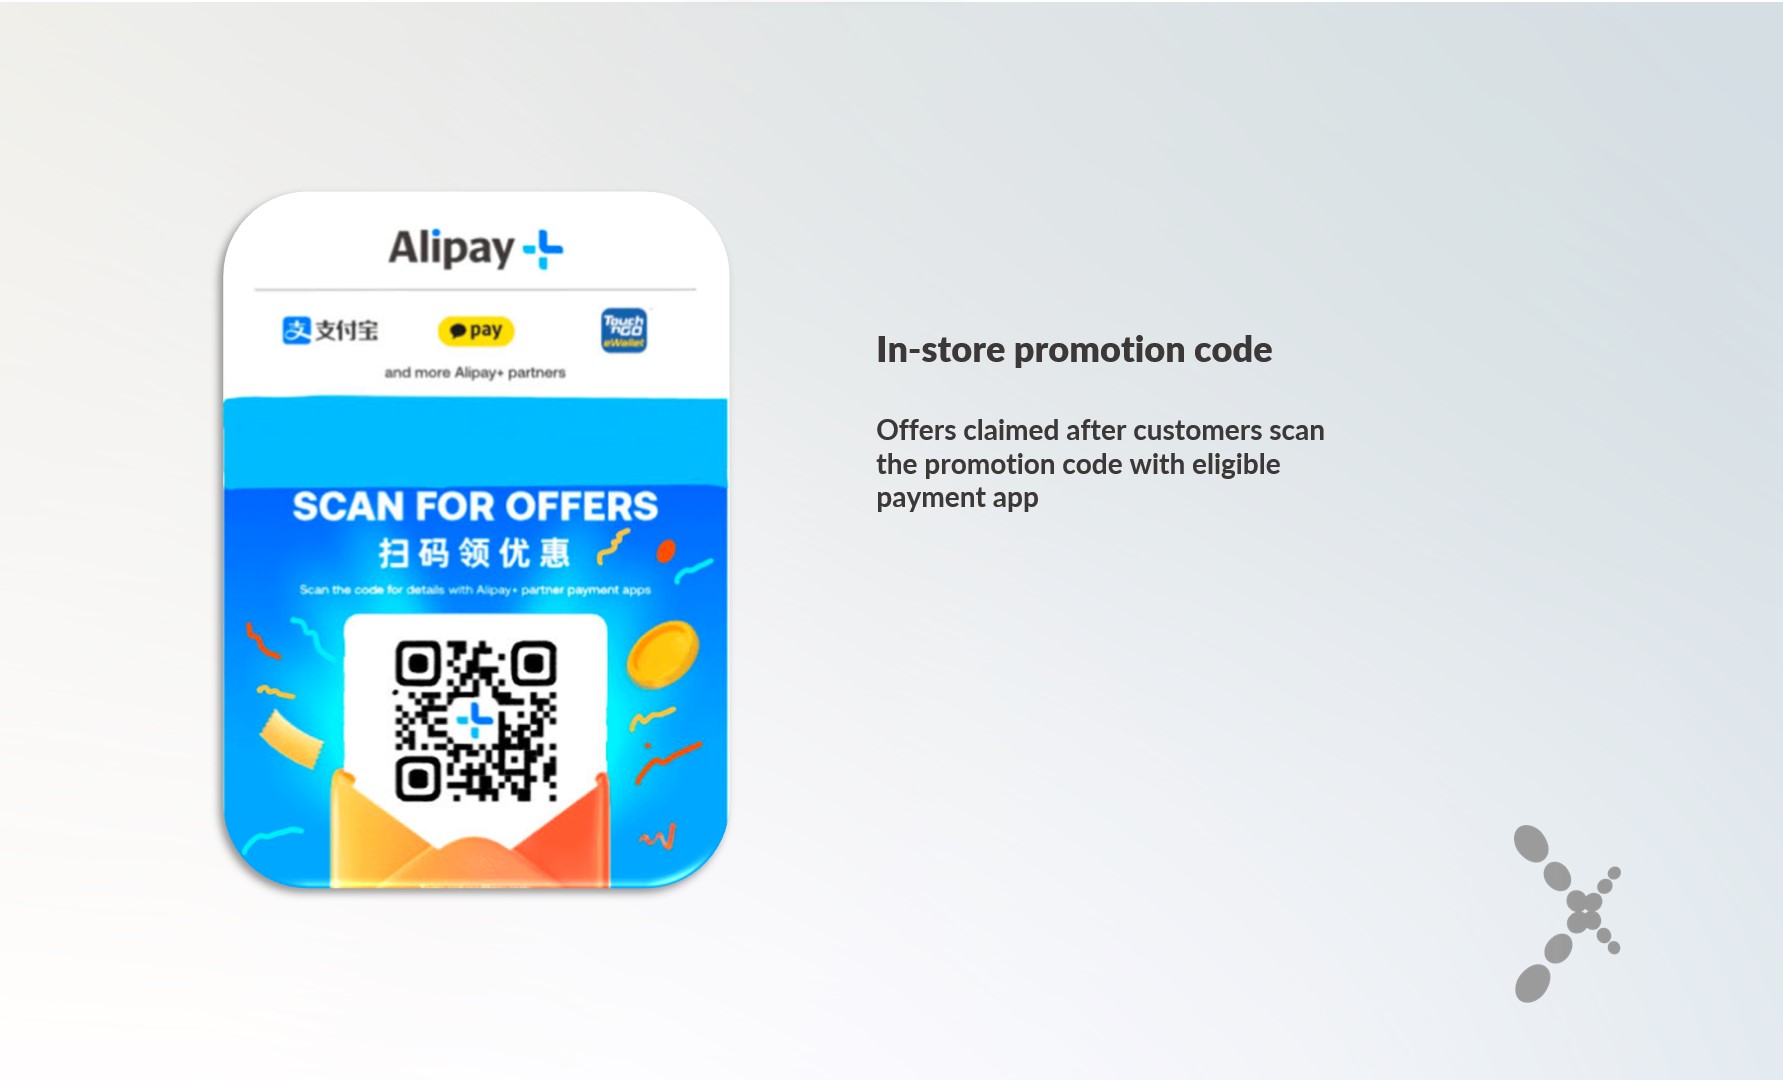 Alipay + in-store promotion code